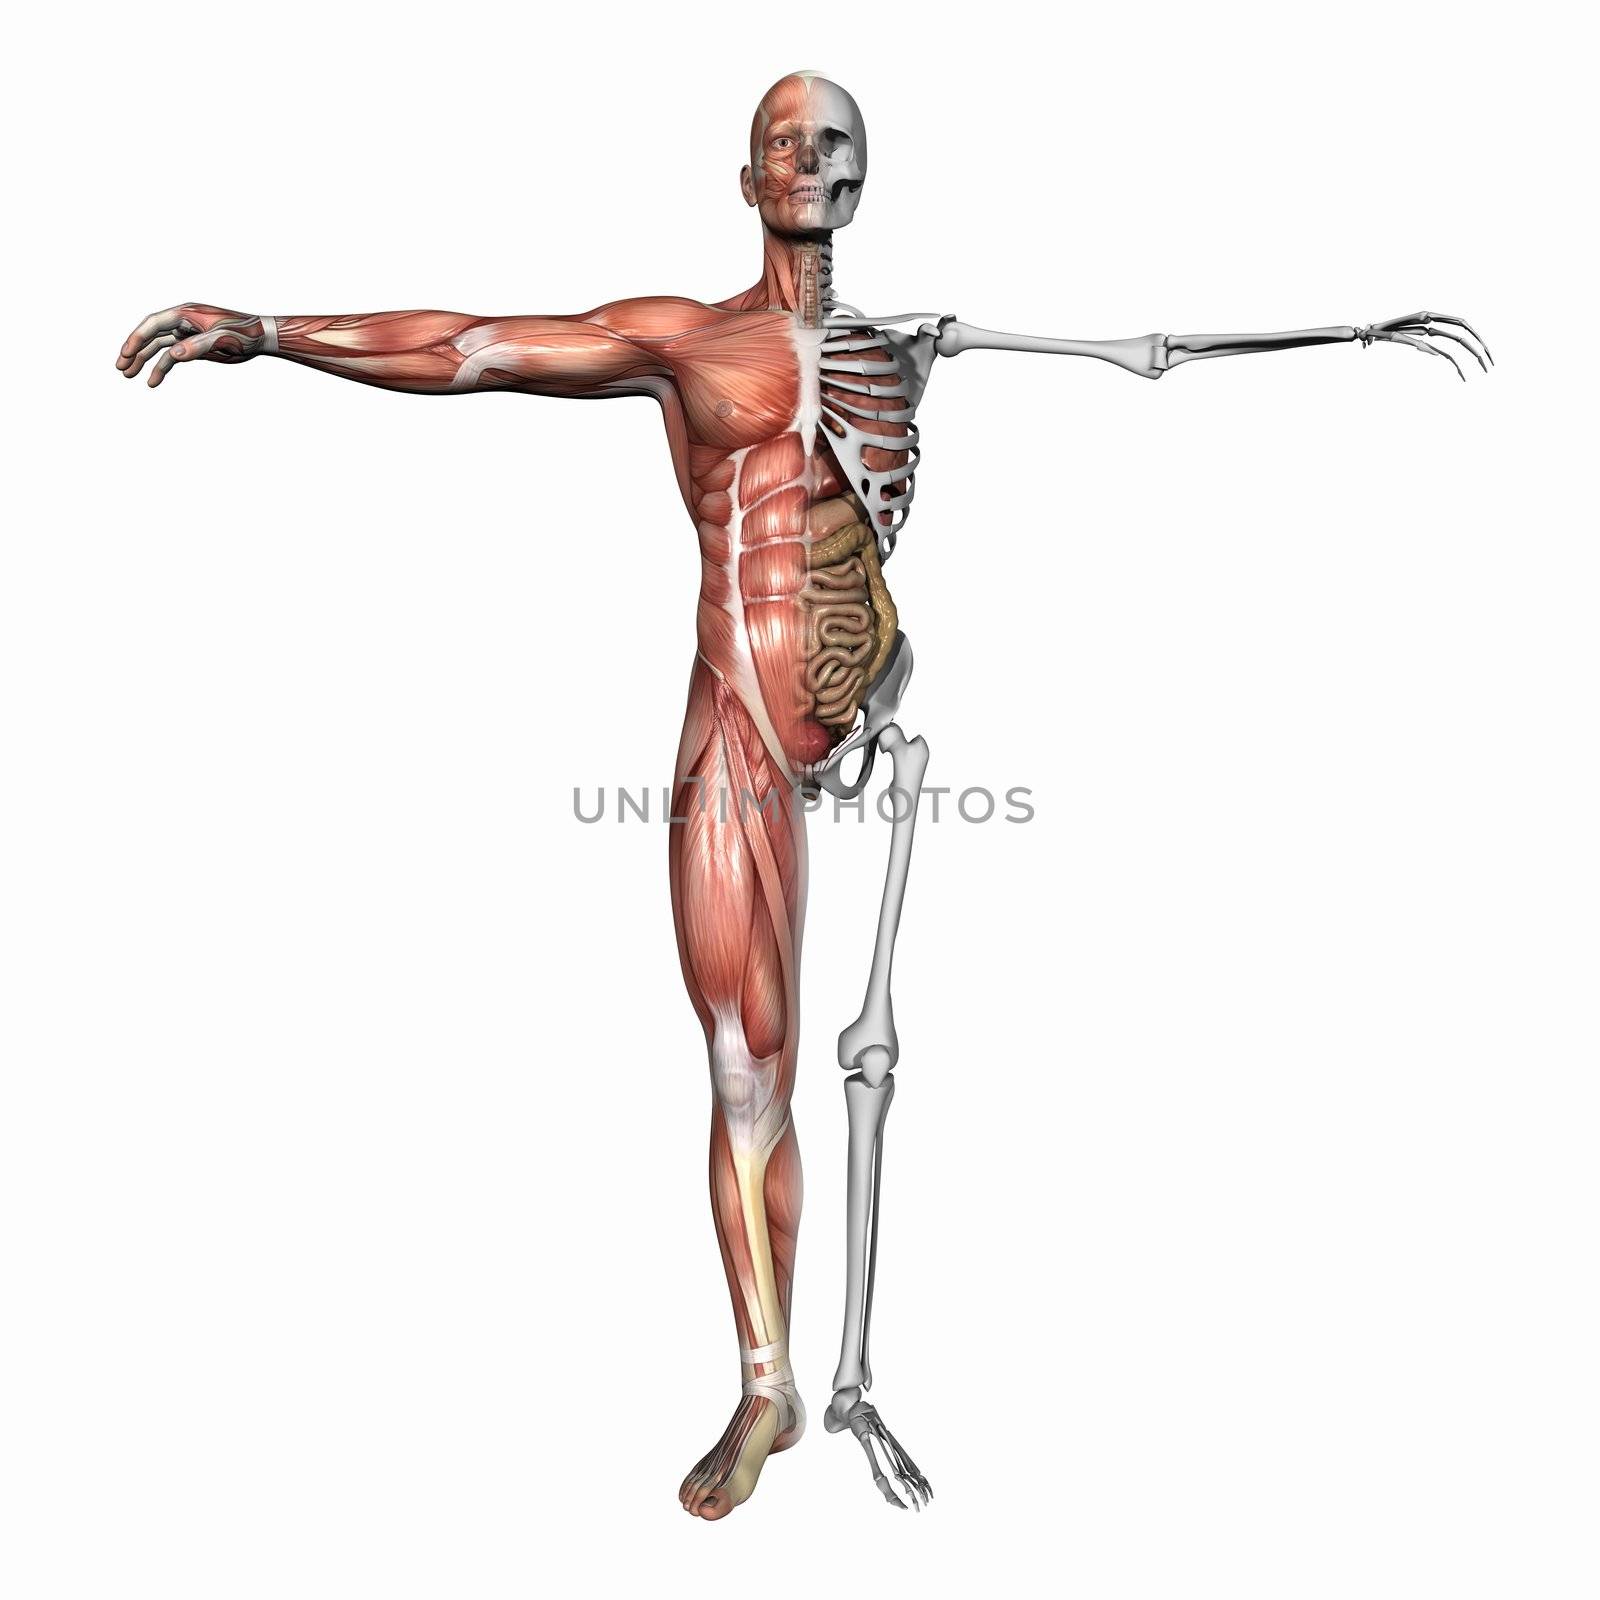 Anatomy, muscles and skeleton by DuToVision